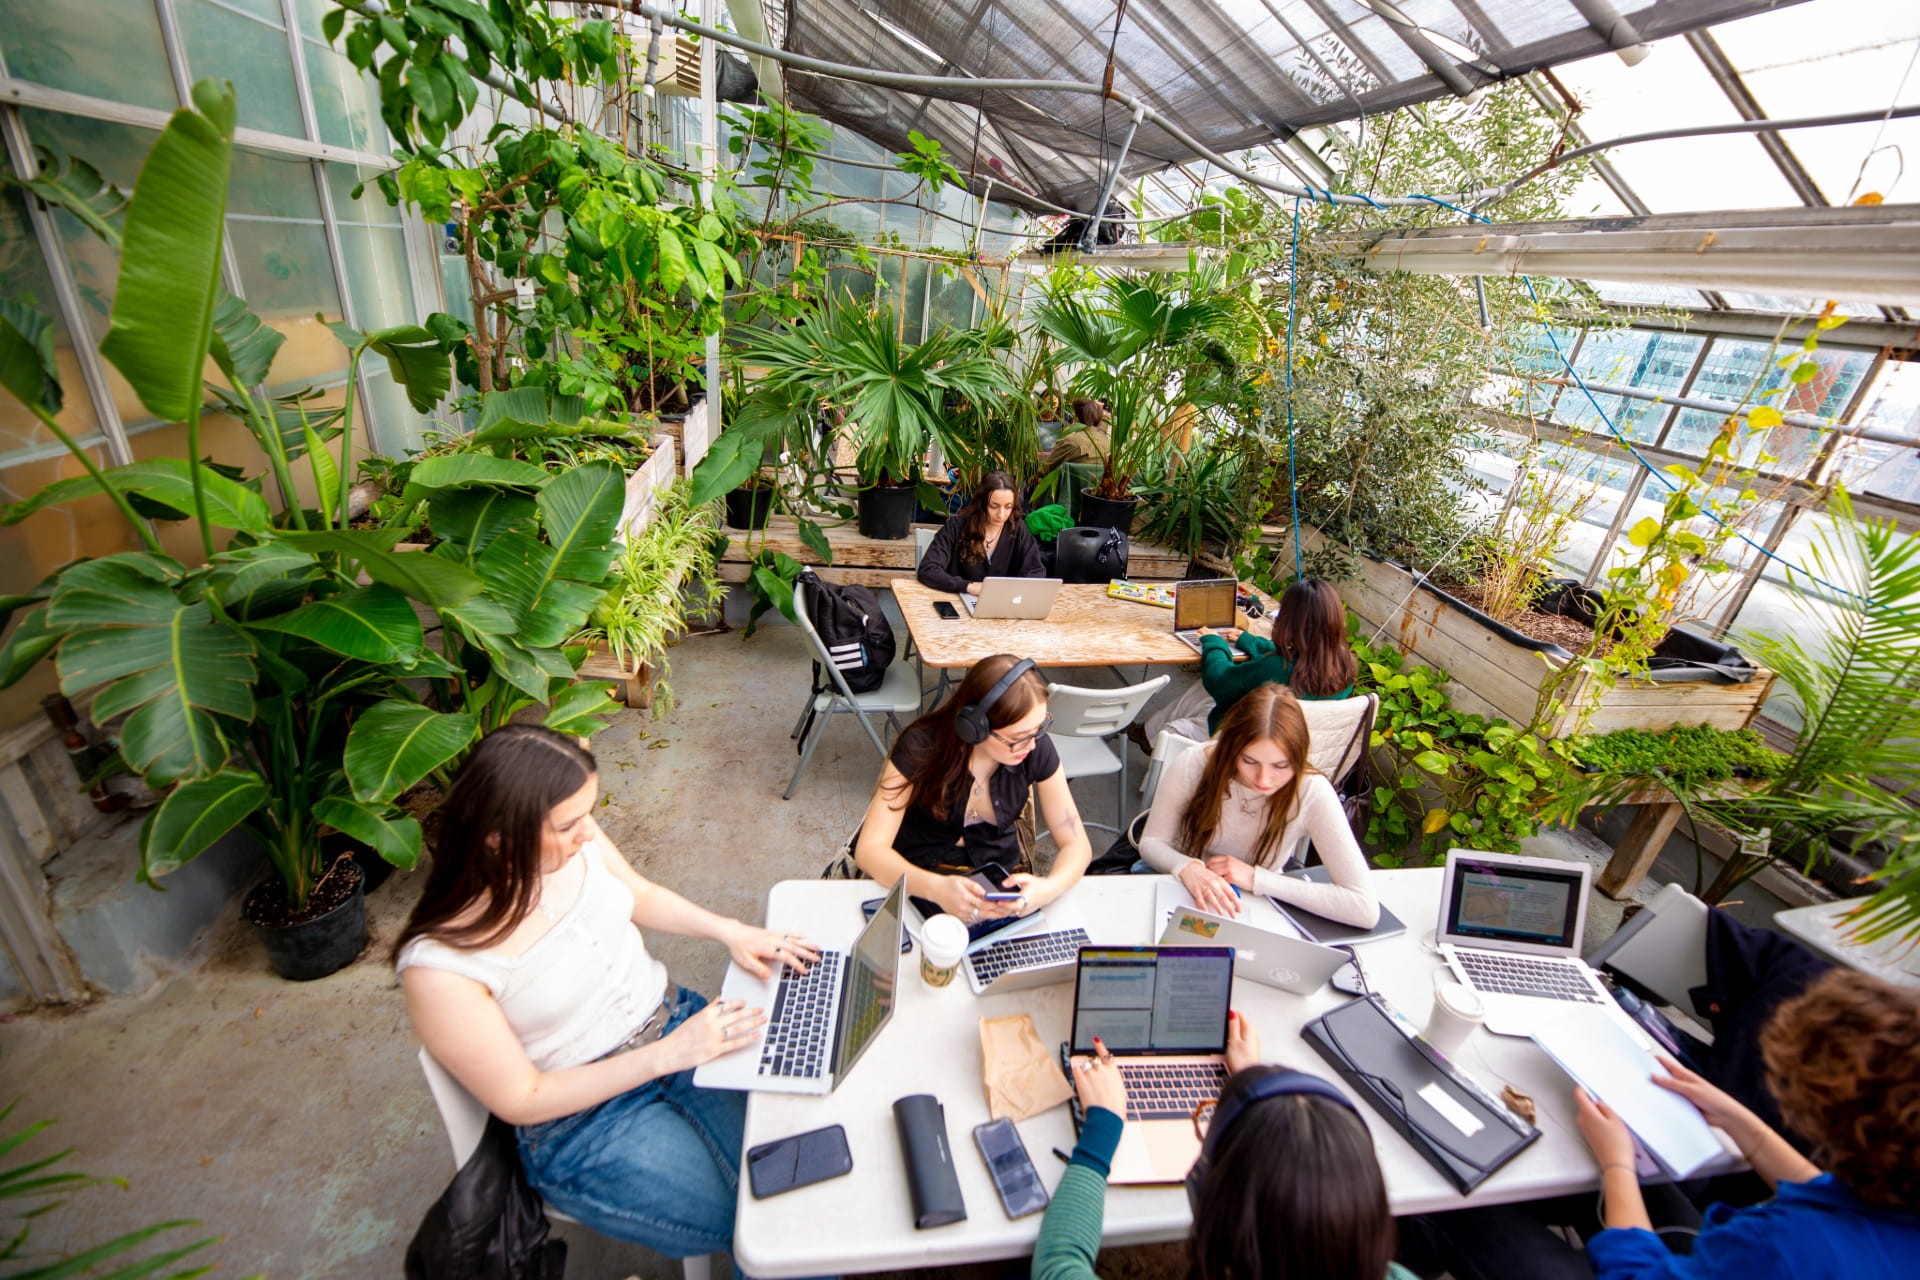 Students studying at the greenhouse